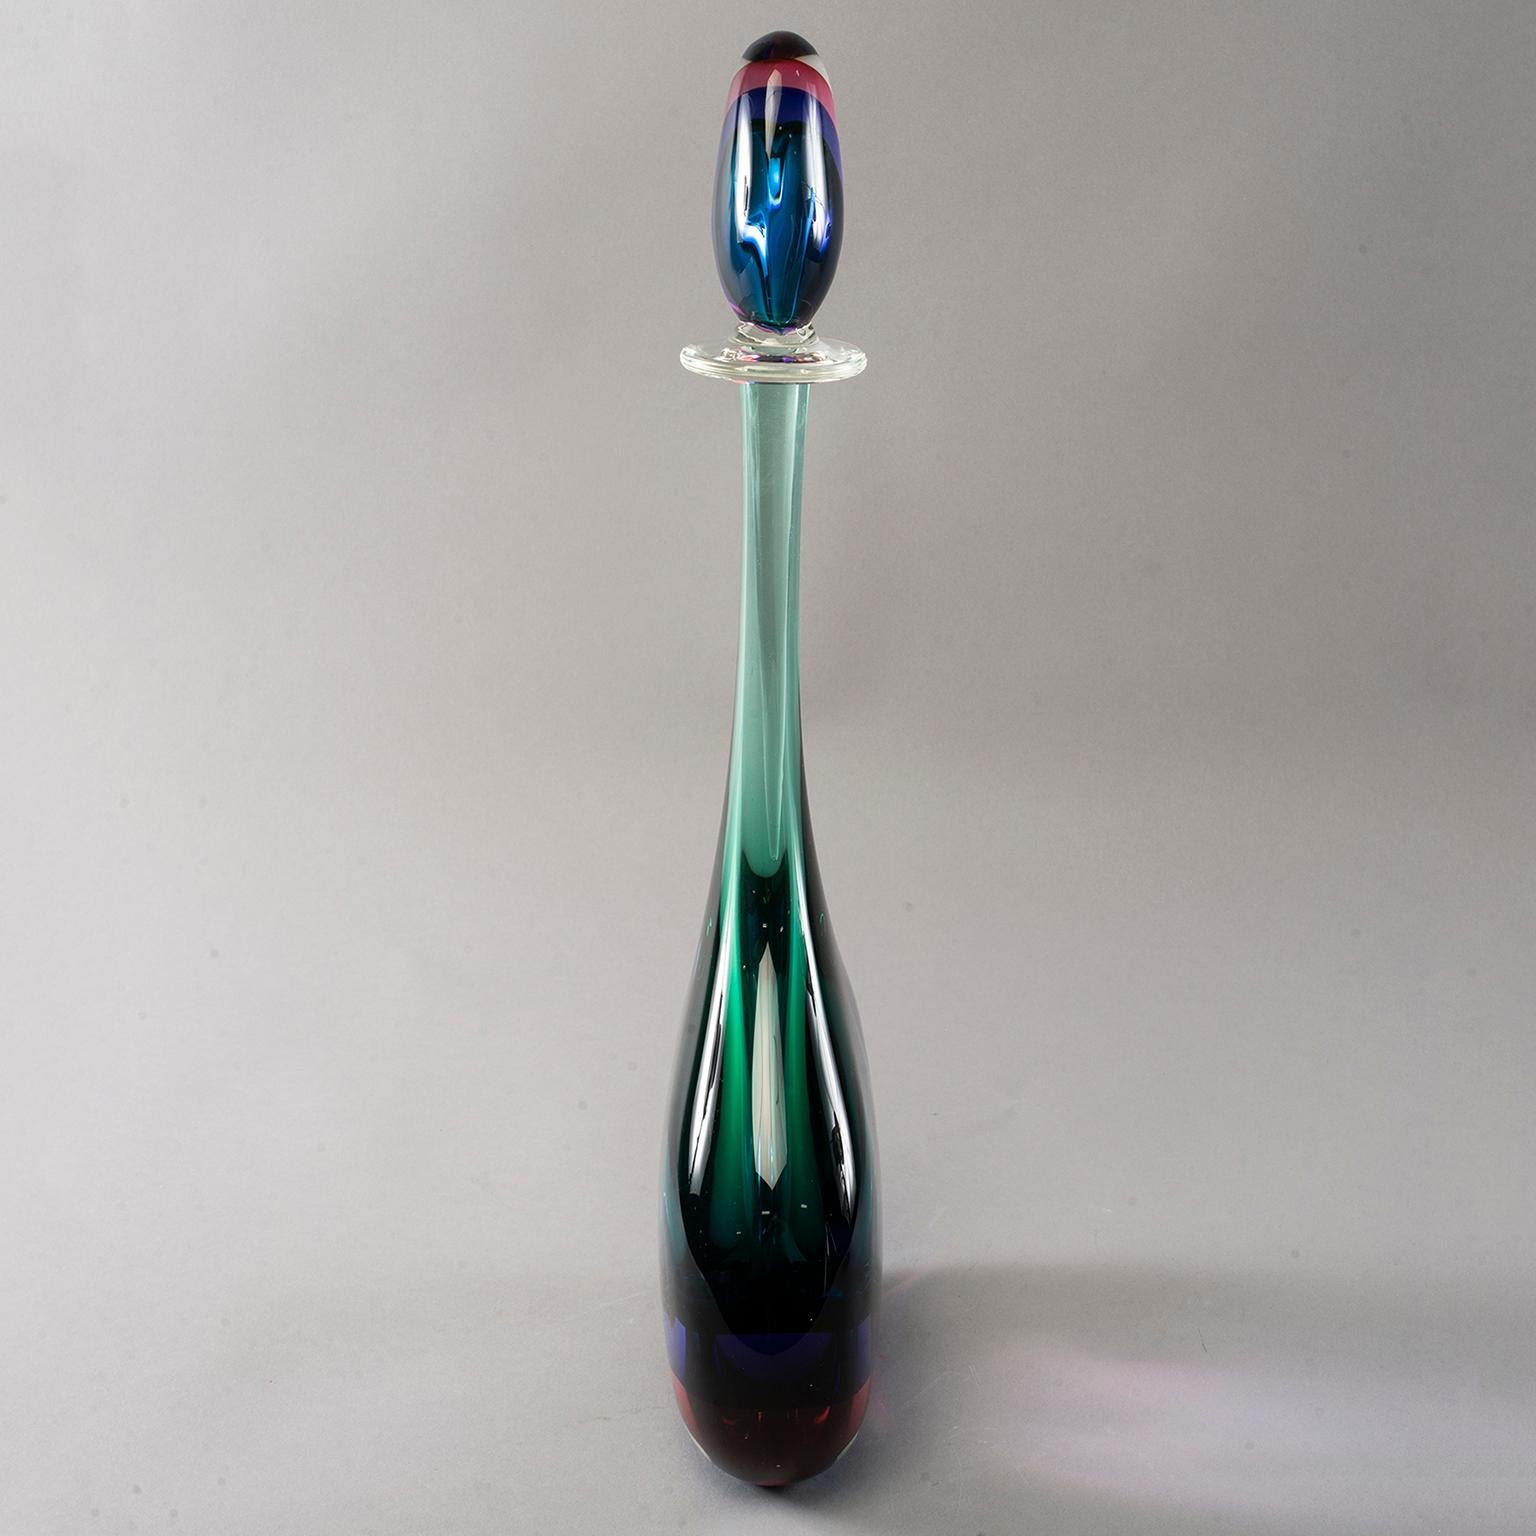 Extra tall Murano glass sommerso style bottle with perfume style stopper. Clear outer layer of glass with magenta, sapphire and emerald layers of color in both bottle and stopper. New, with no flaws found. 